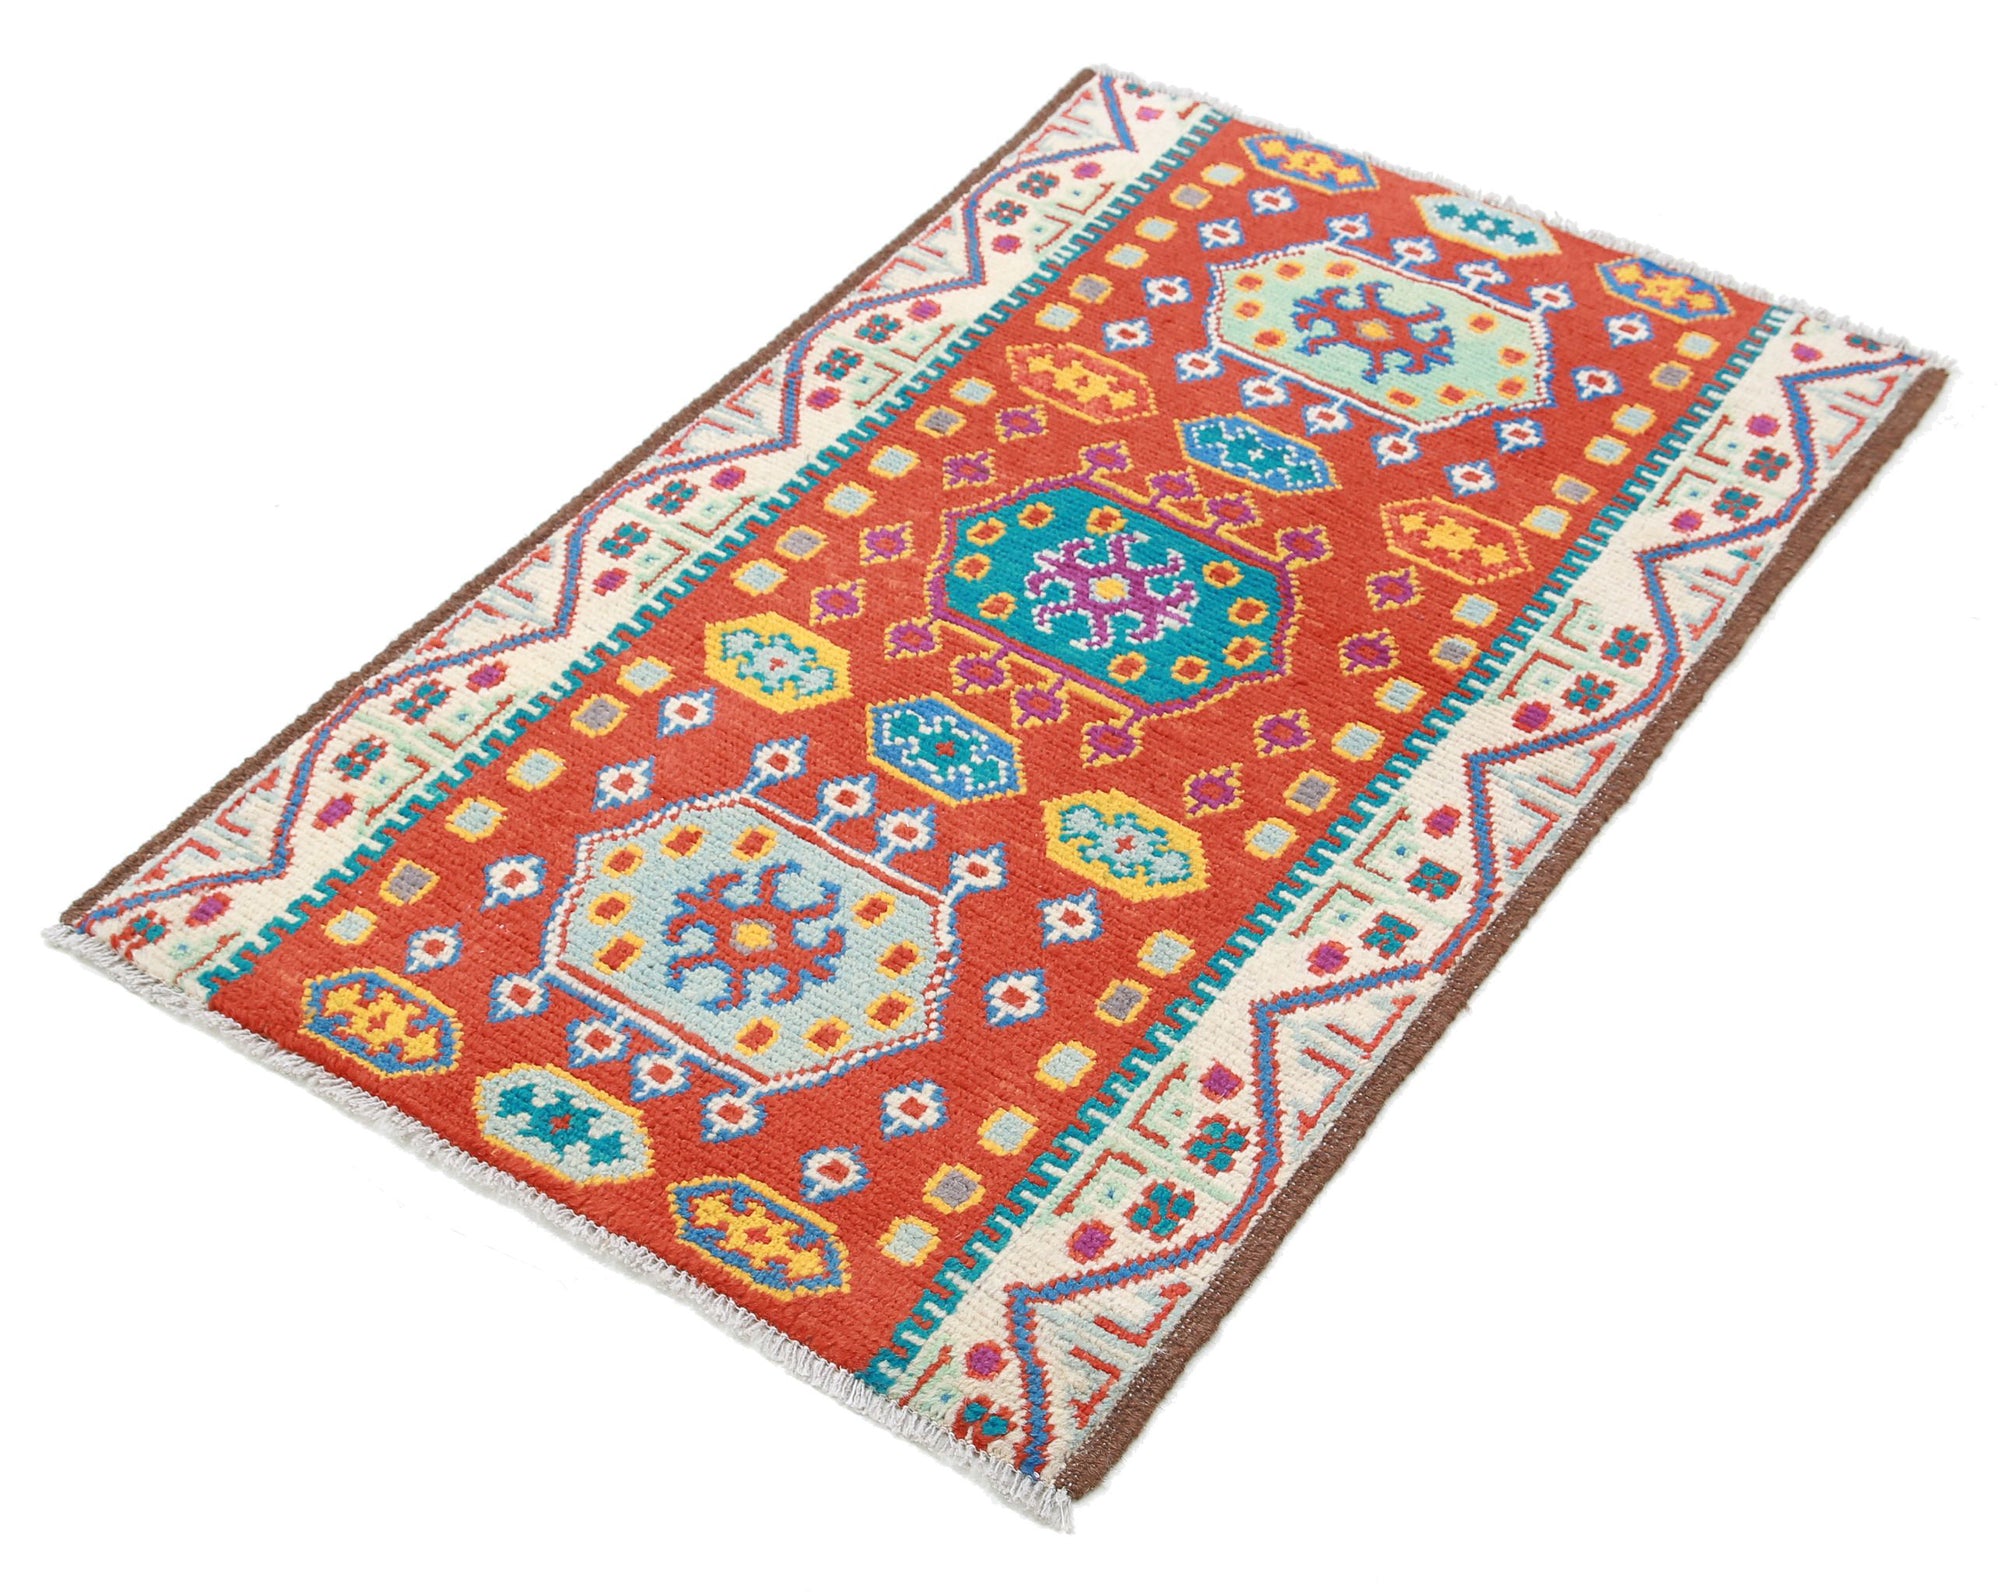 Revival-hand-knotted-qarghani-wool-rug-5014188-2.jpg